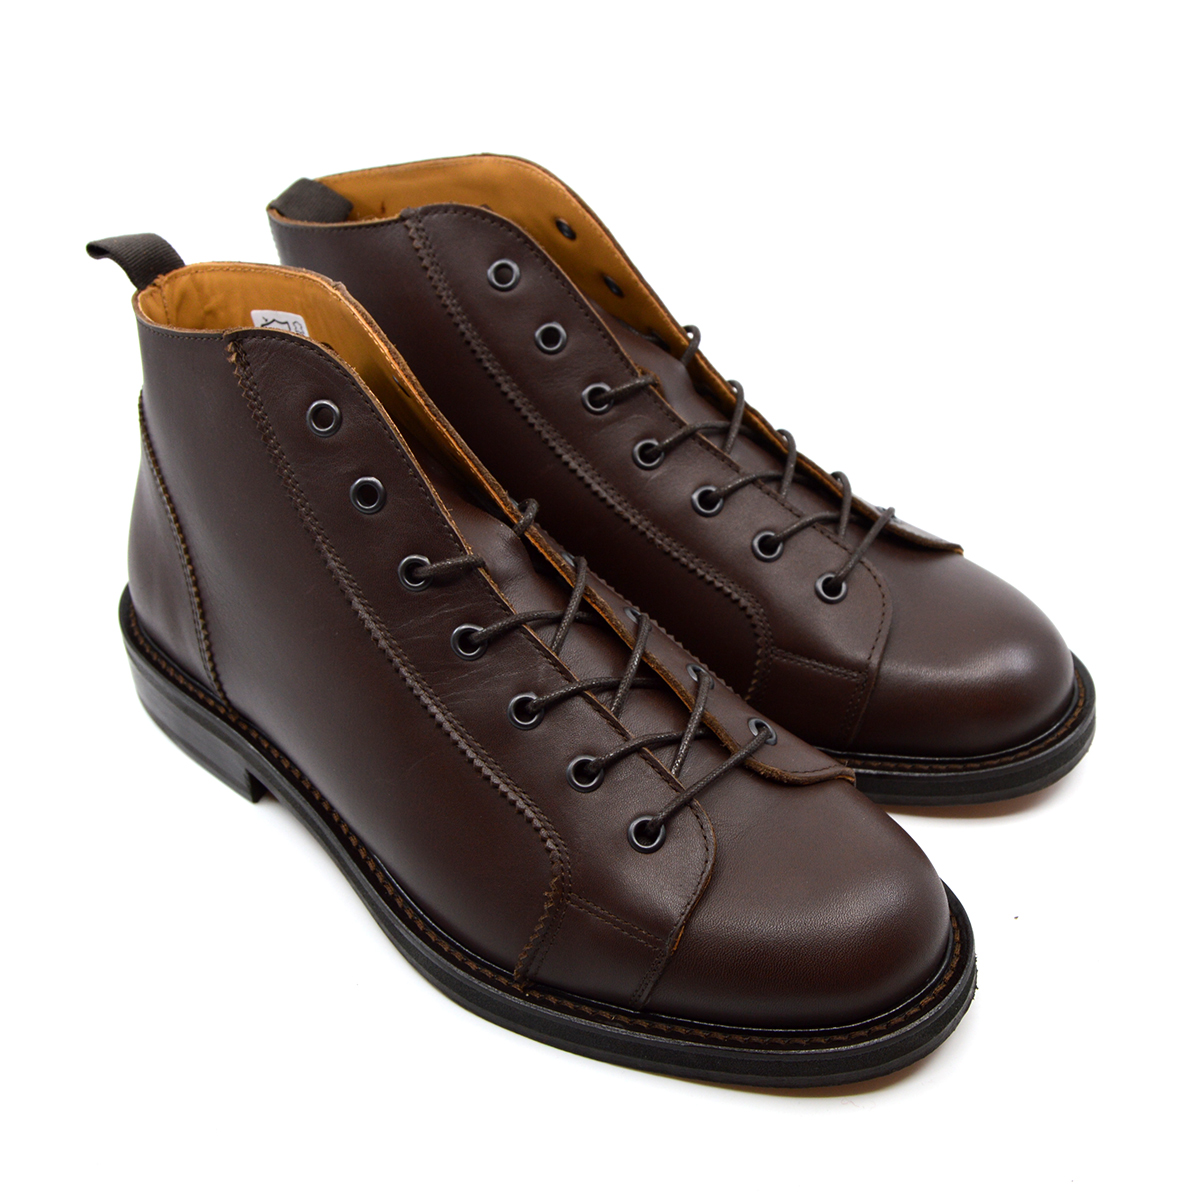 Dark Brown Monkey Boots Version 4 – New Leather Upper – Leather Sole ...